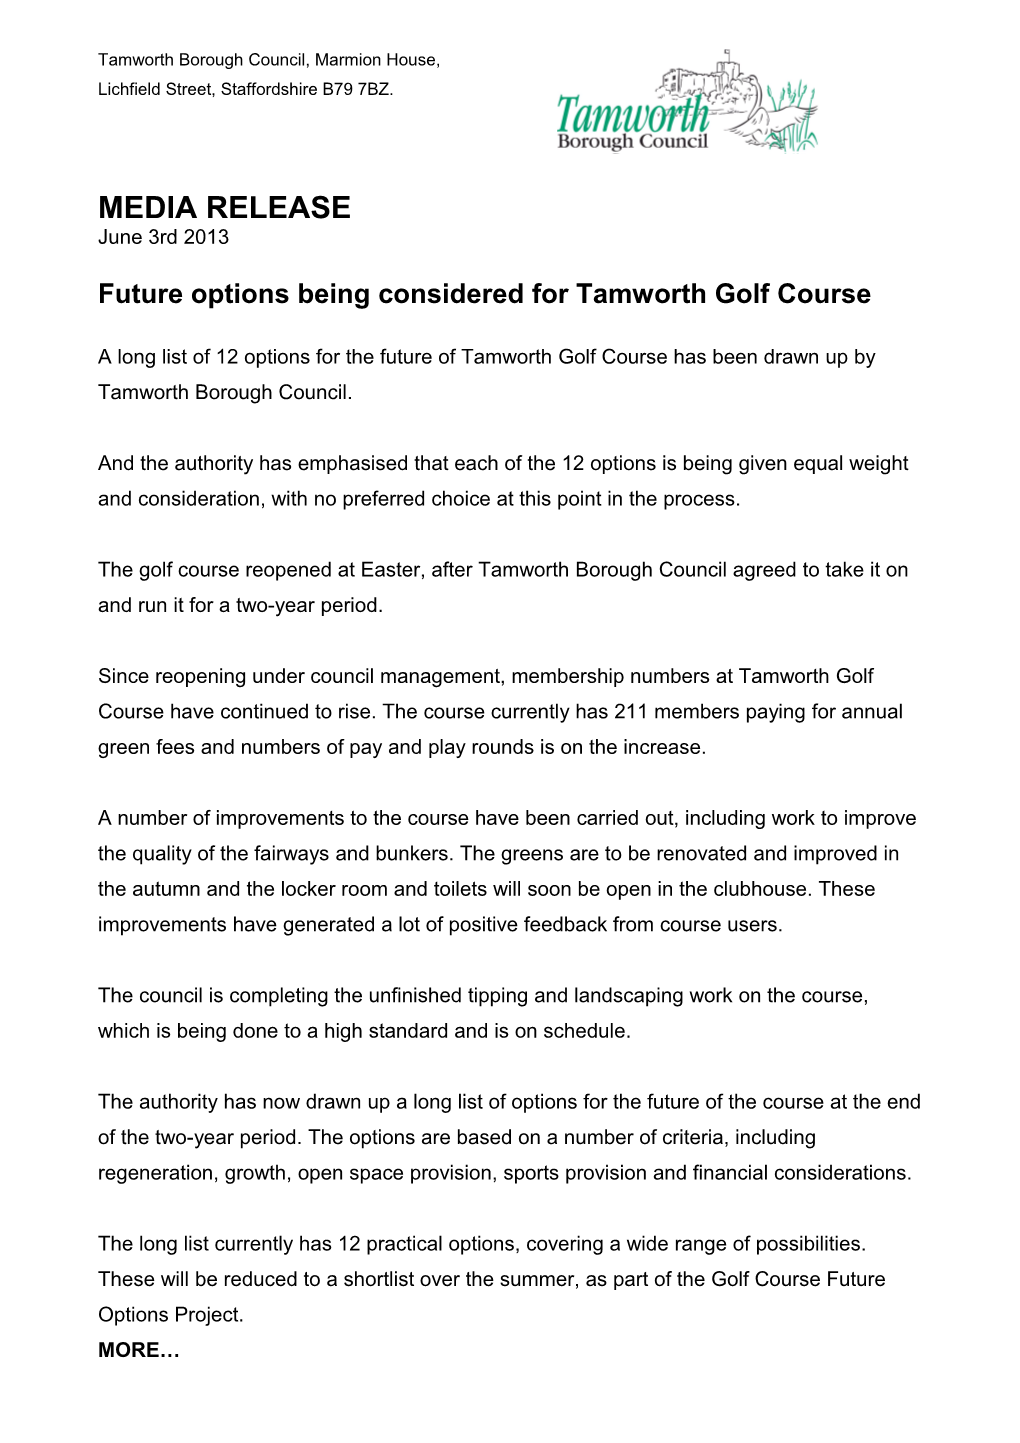 Future Options Being Considered for Tamworth Golf Course